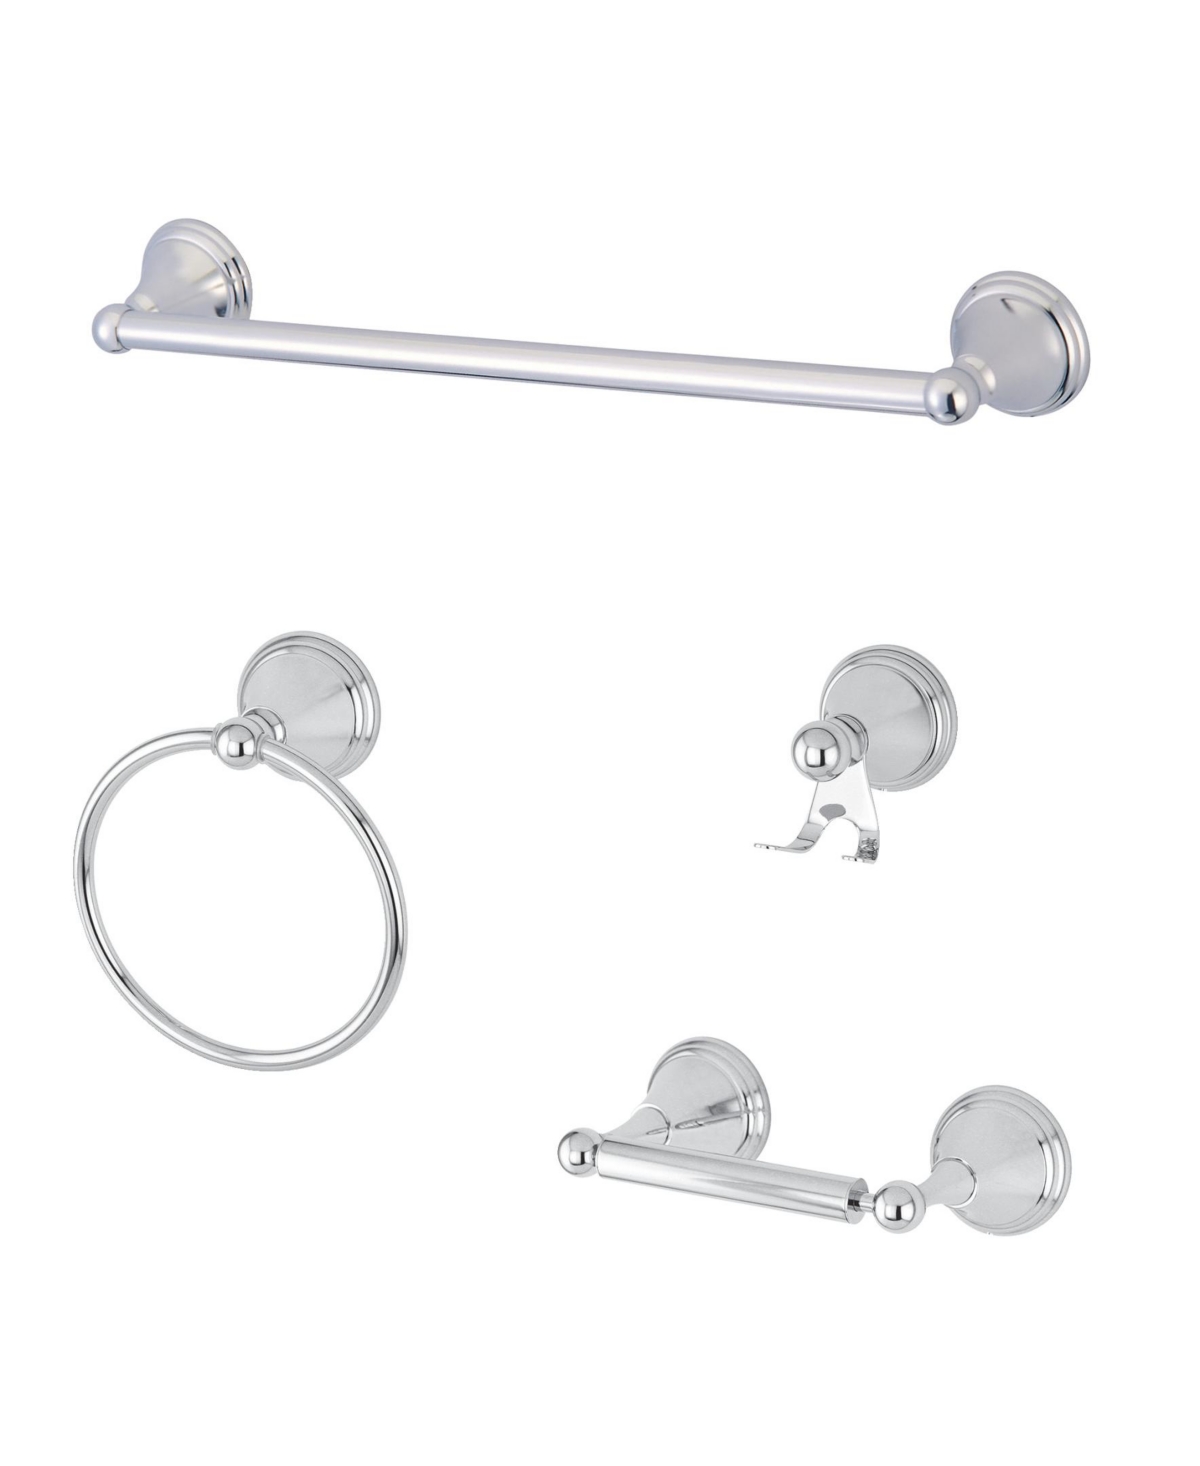 Kingston Brass Governor 4-Pc. Bathroom Accessories Set in Polished Chrome Bedding